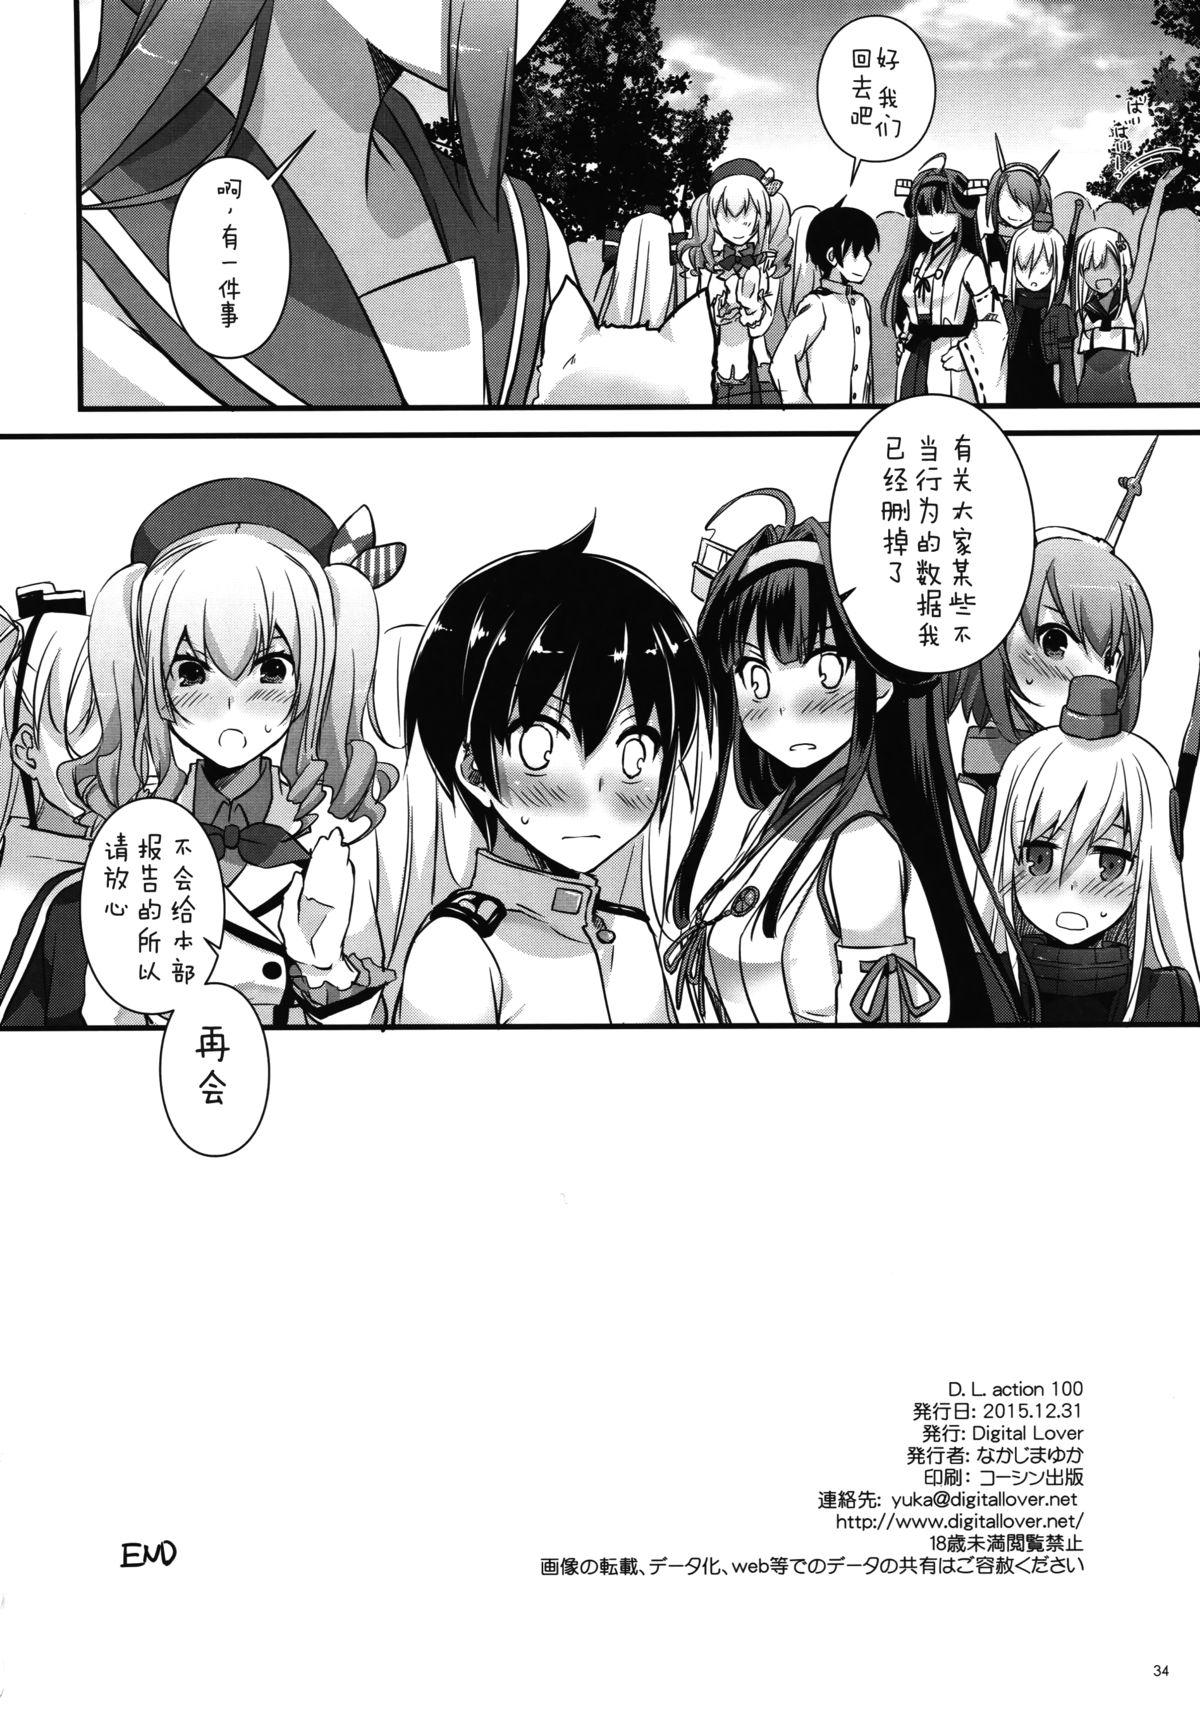 Missionary D.L. action 100 - Kantai collection Black Dick - Page 34